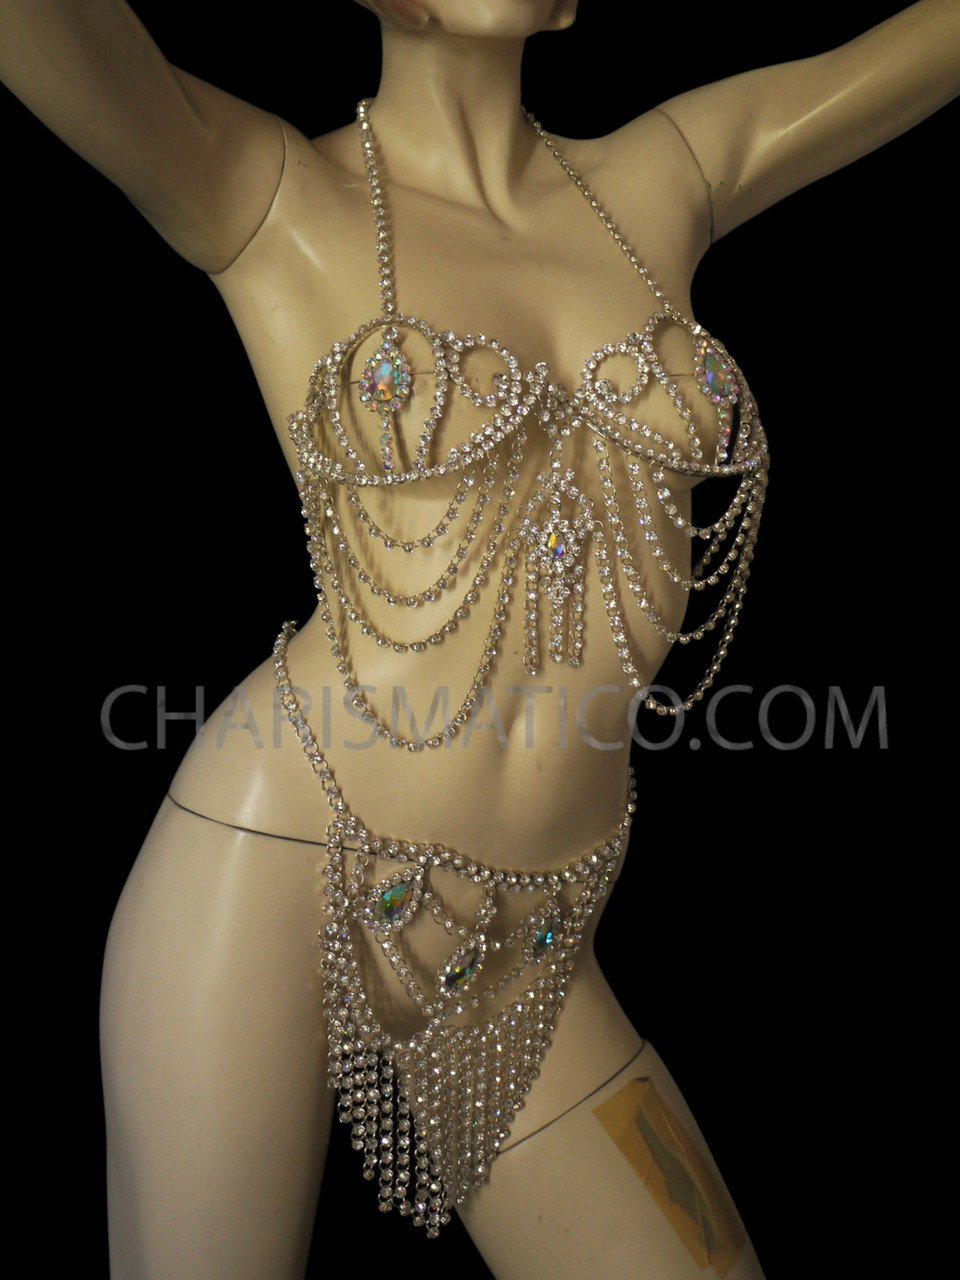 Rhinestone Chained Iridescent Crystal Accented Body Harness Bra